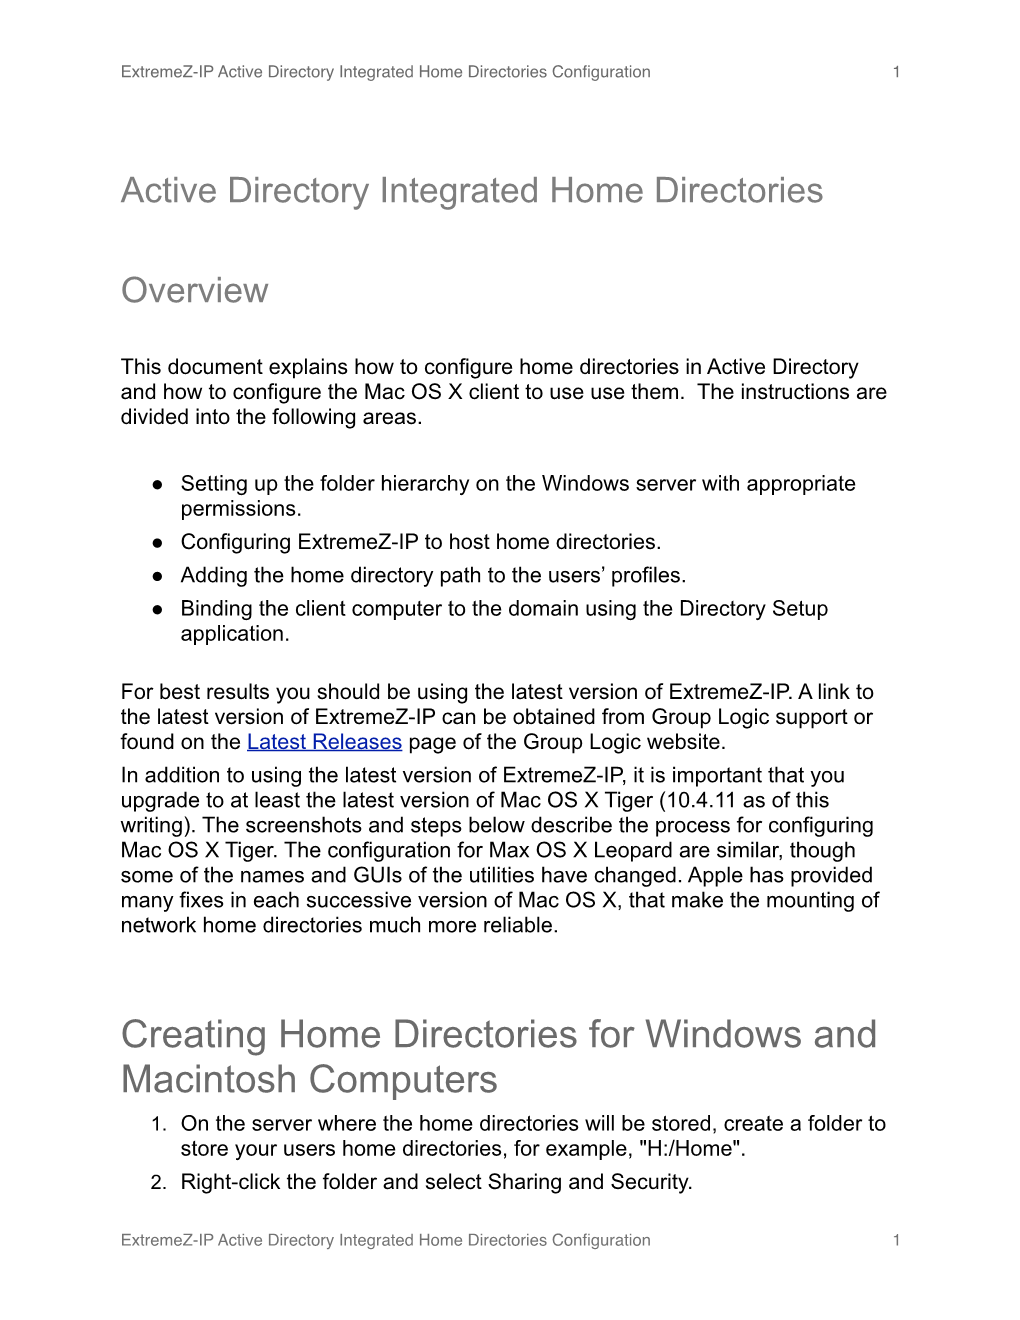 Creating Home Directories for Windows and Macintosh Computers 1